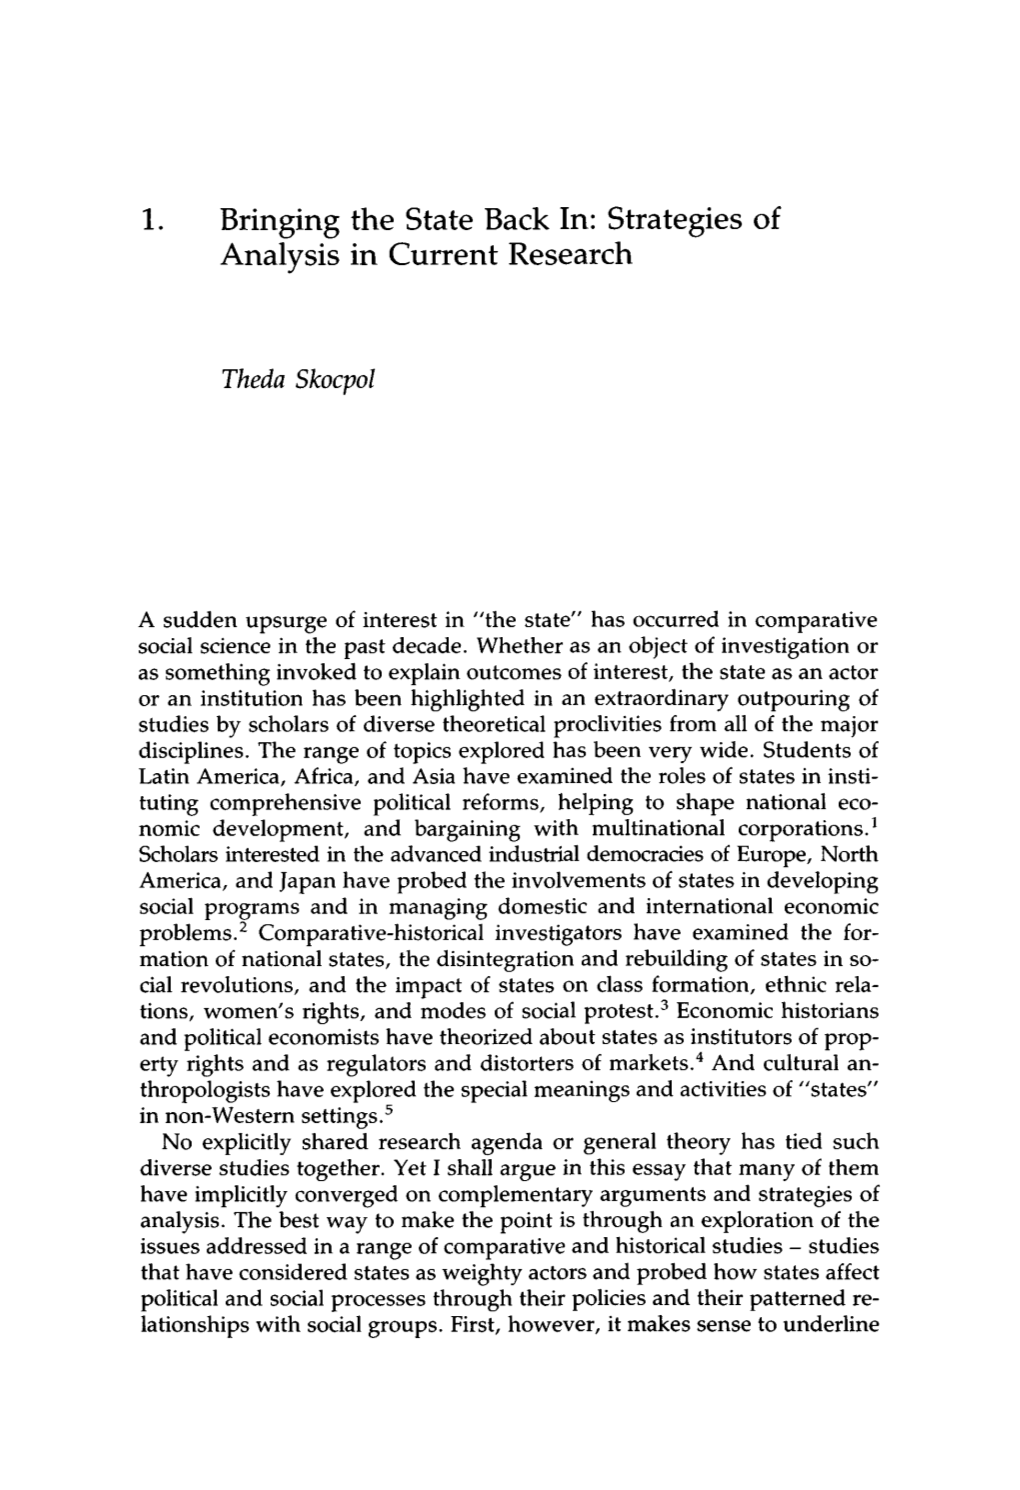 Bringing the State Back In: Strategies of Analysis in Current Research